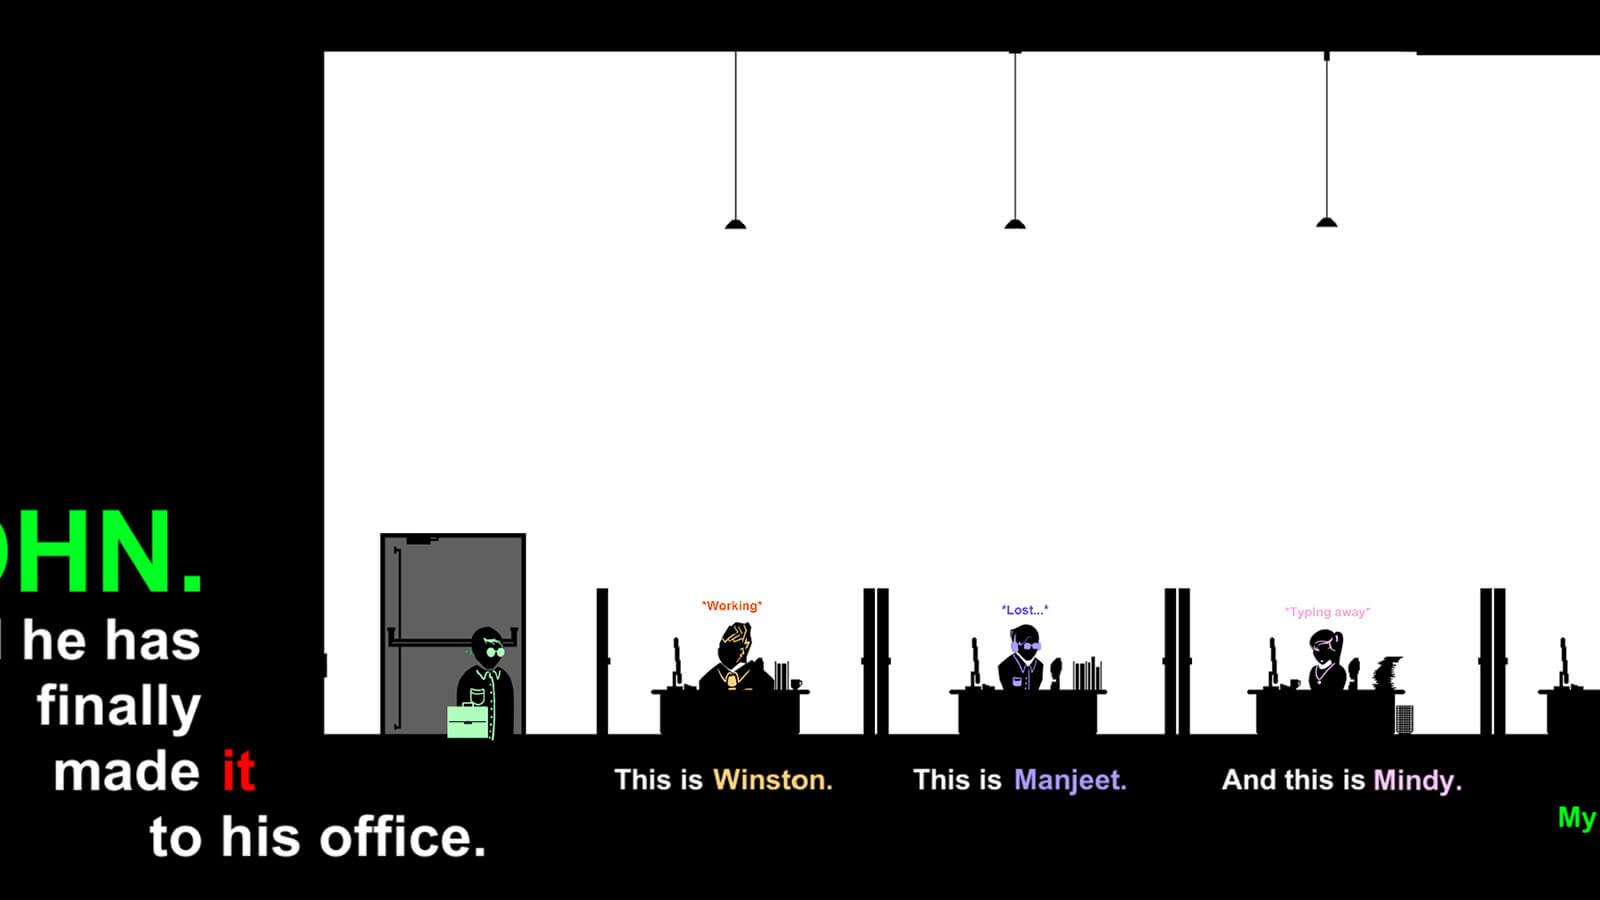 A flat, 2D character in silhouette holding a briefcase stands in an office with other silhouettes sitting at their desk.